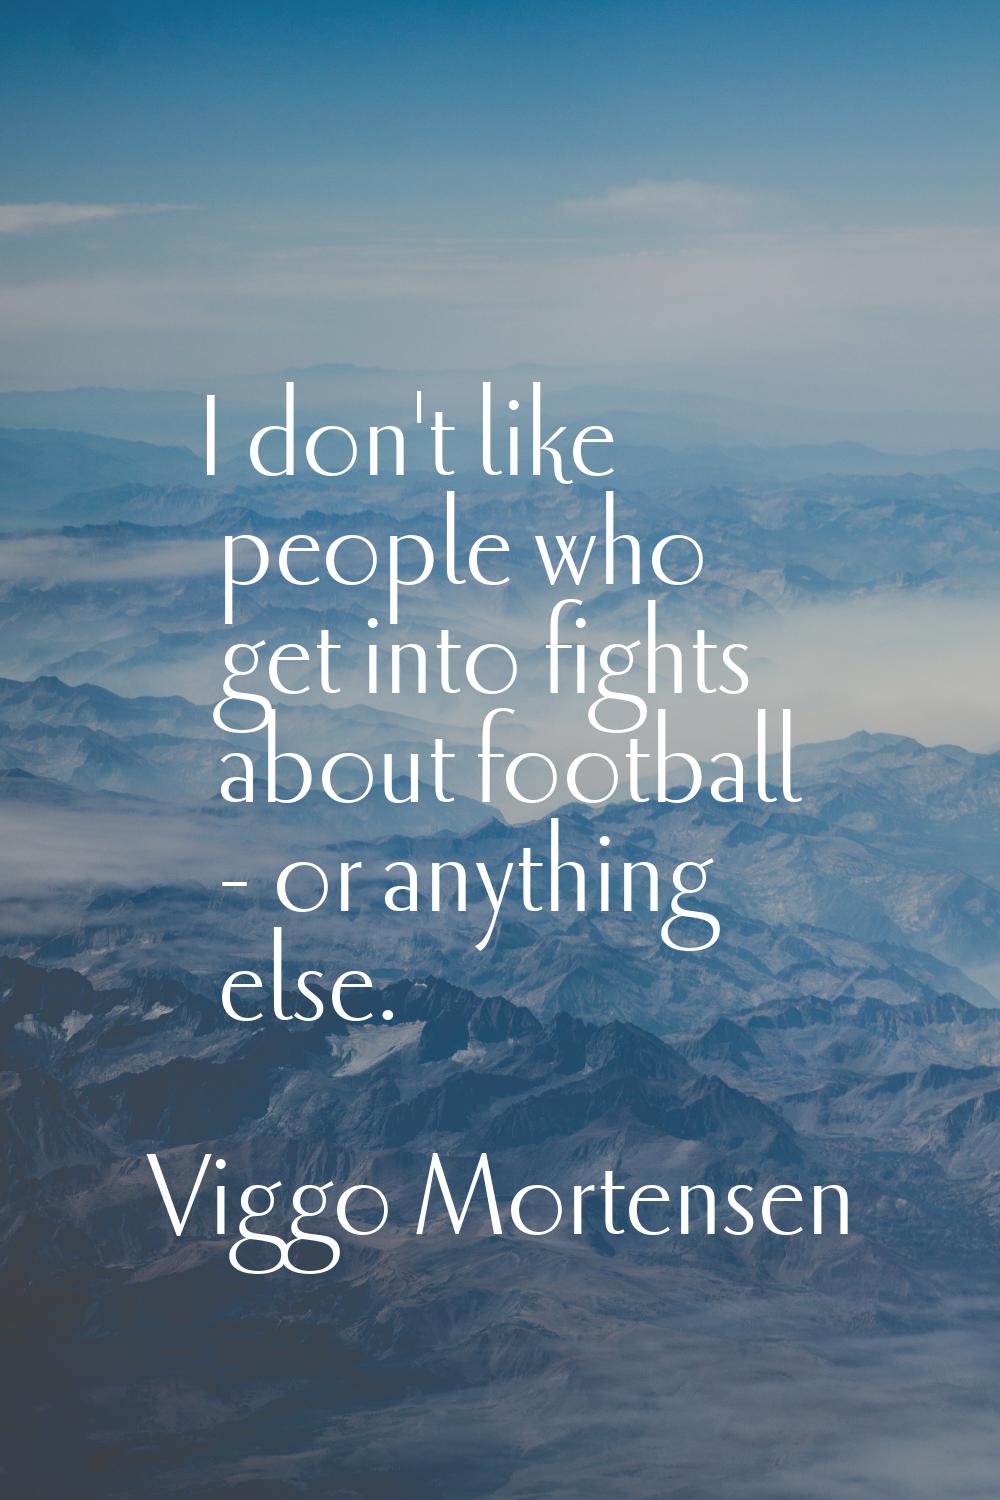 I don't like people who get into fights about football - or anything else.